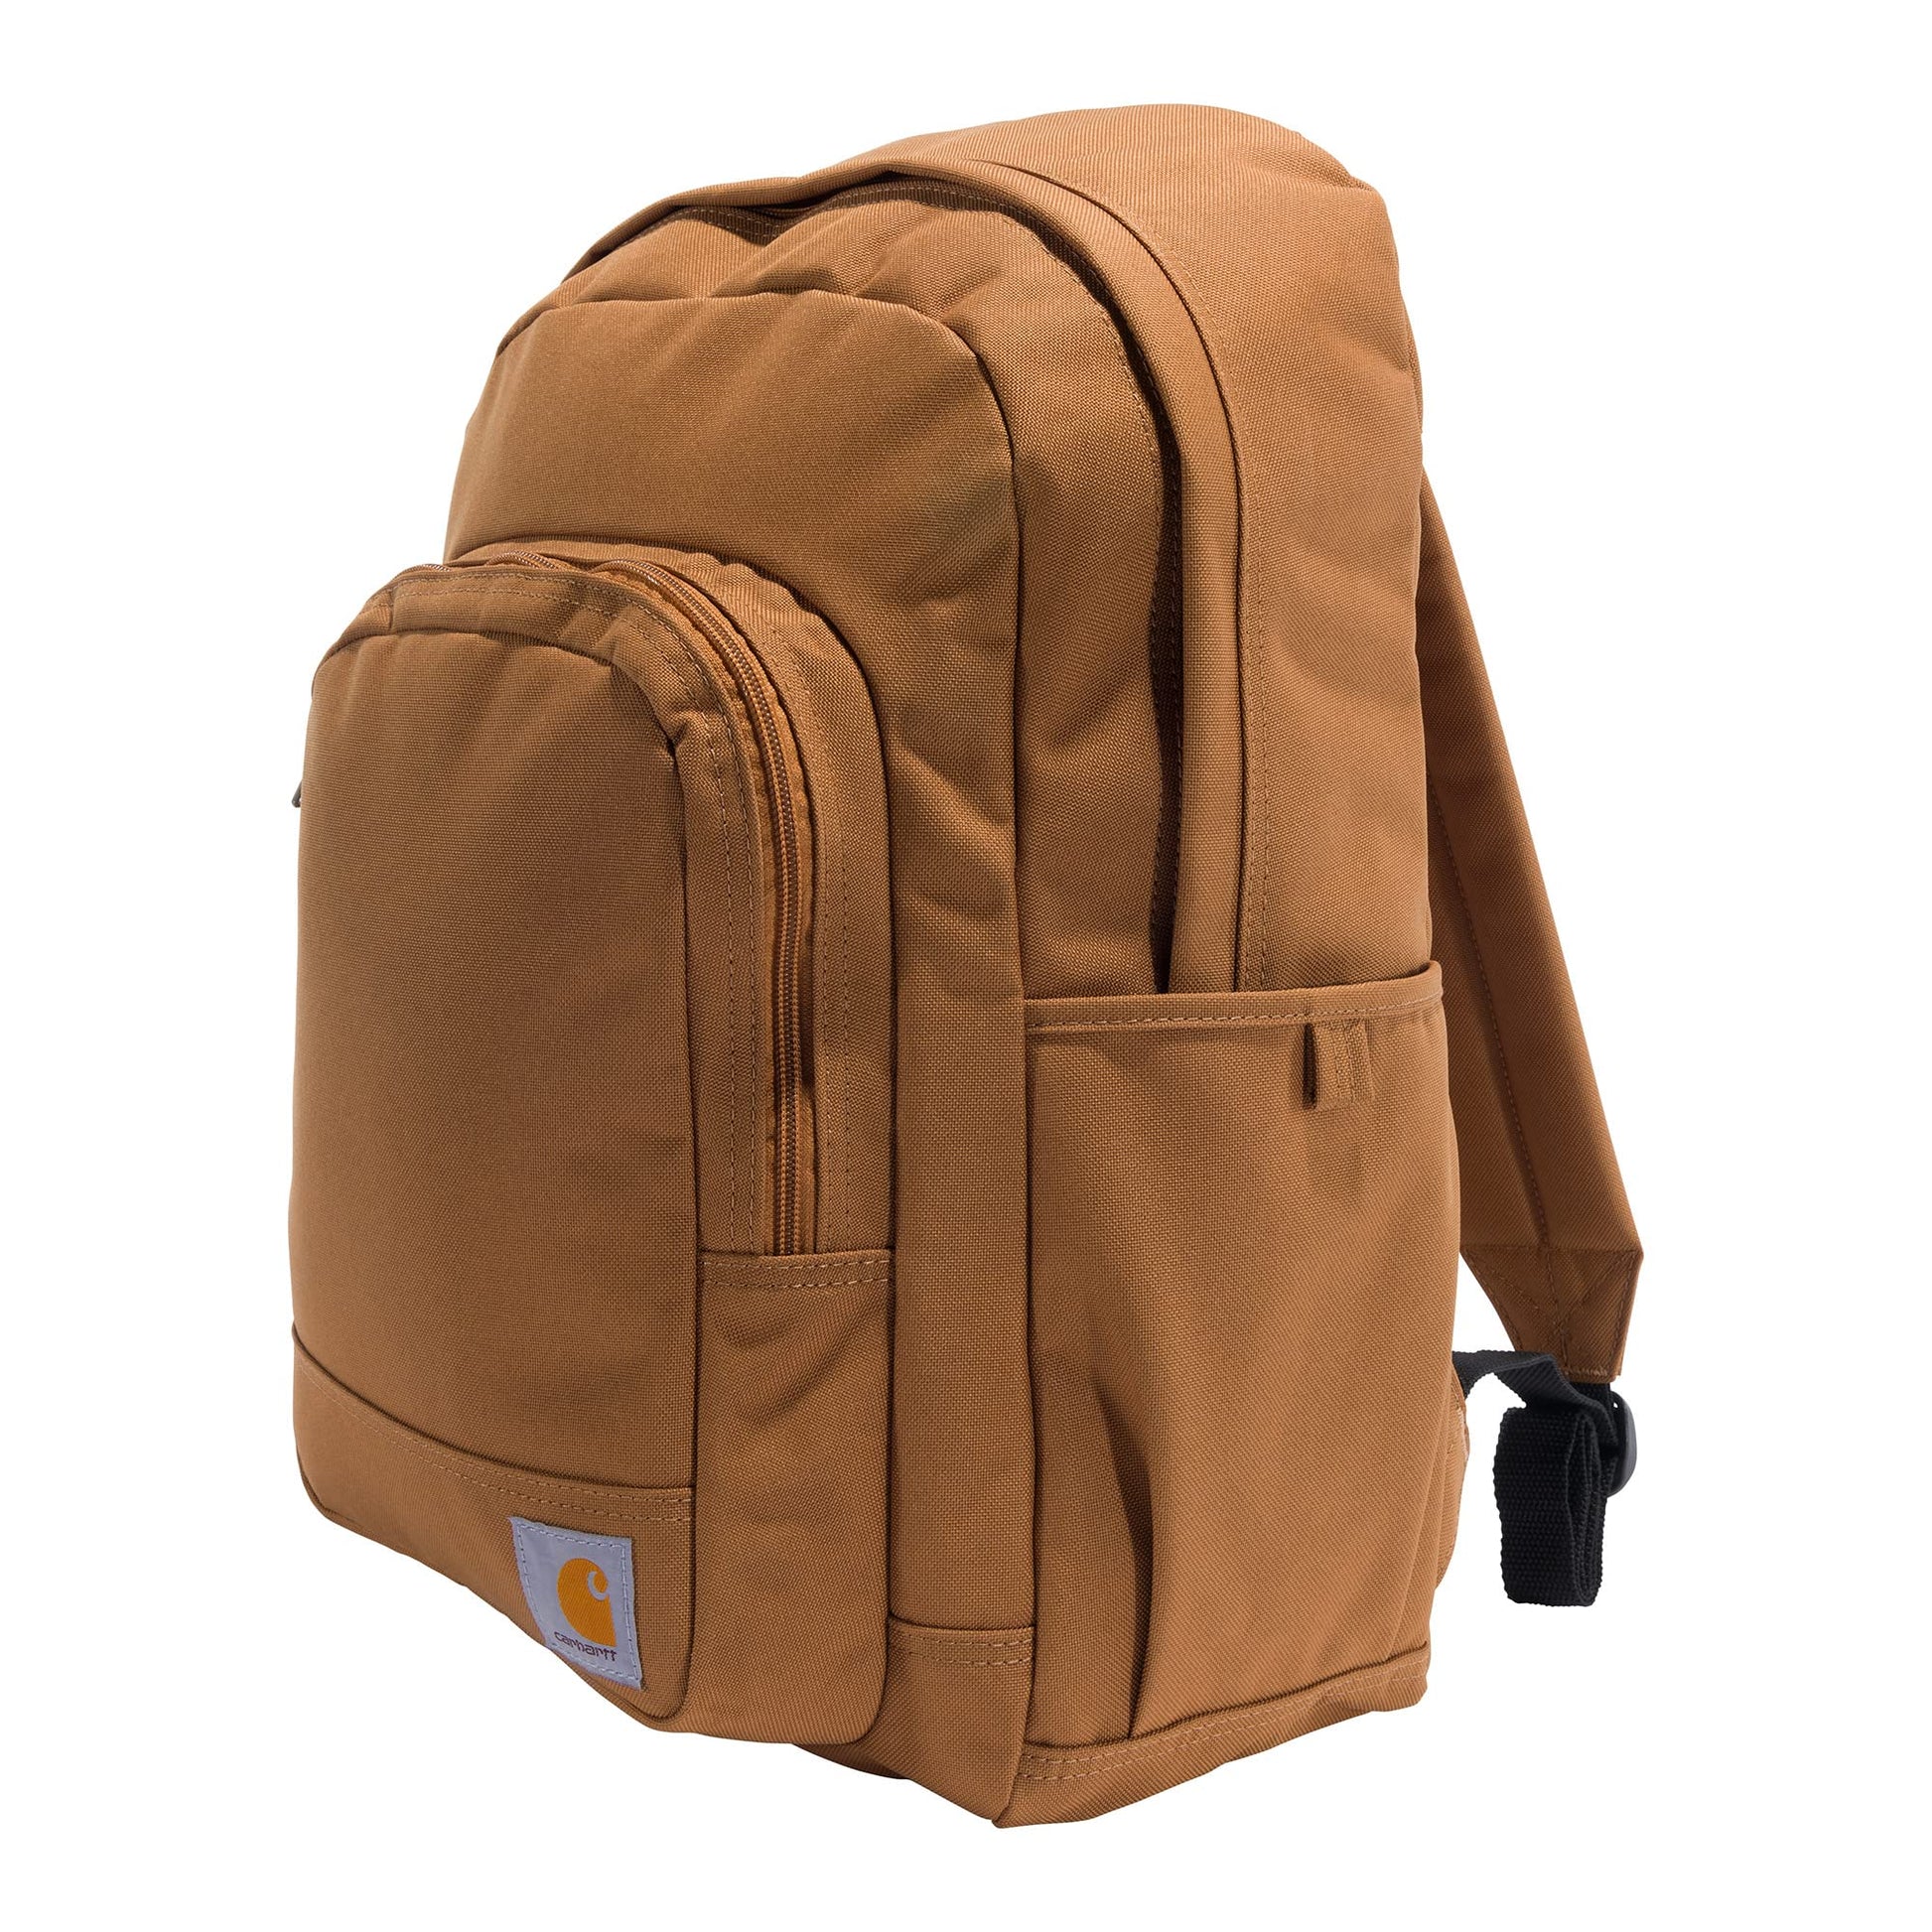 Carhartt 25l Classic Backpack, Durable Water-Resistant Pack with Laptop Sleeve